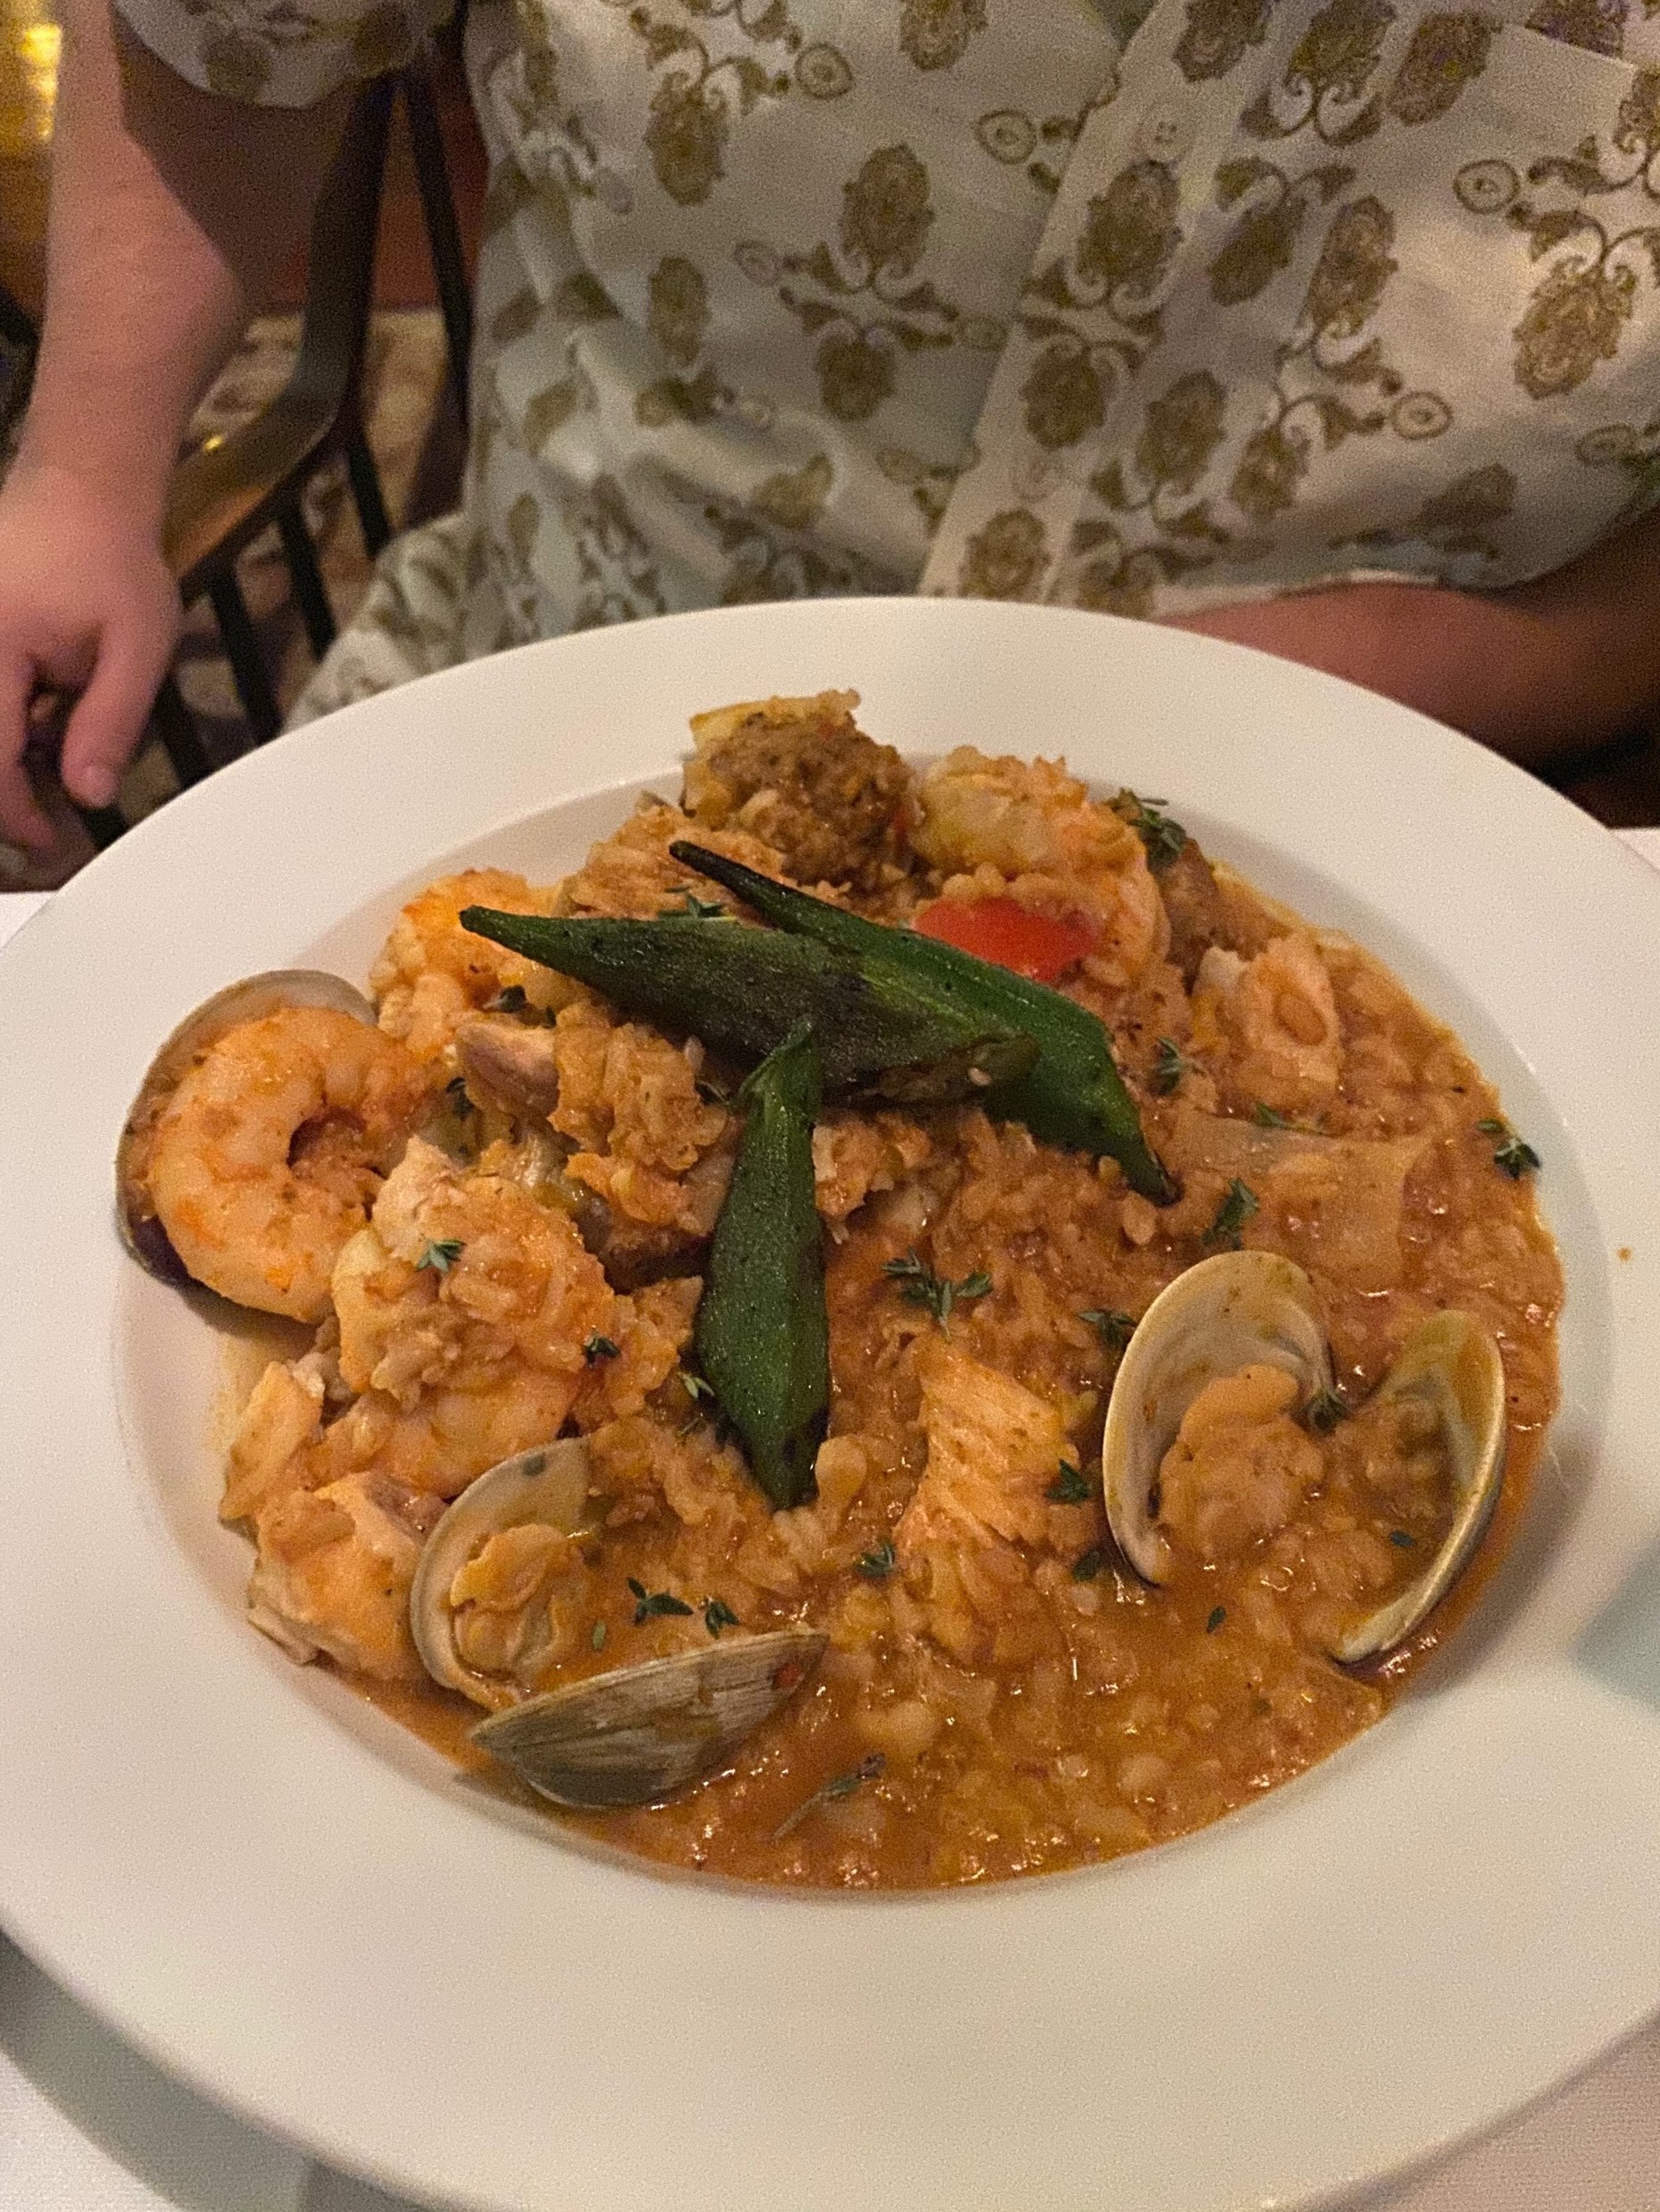 Here is Martin’s Savannah Red Rice with Georgia Prawns, whitefish, clams AND sausage!